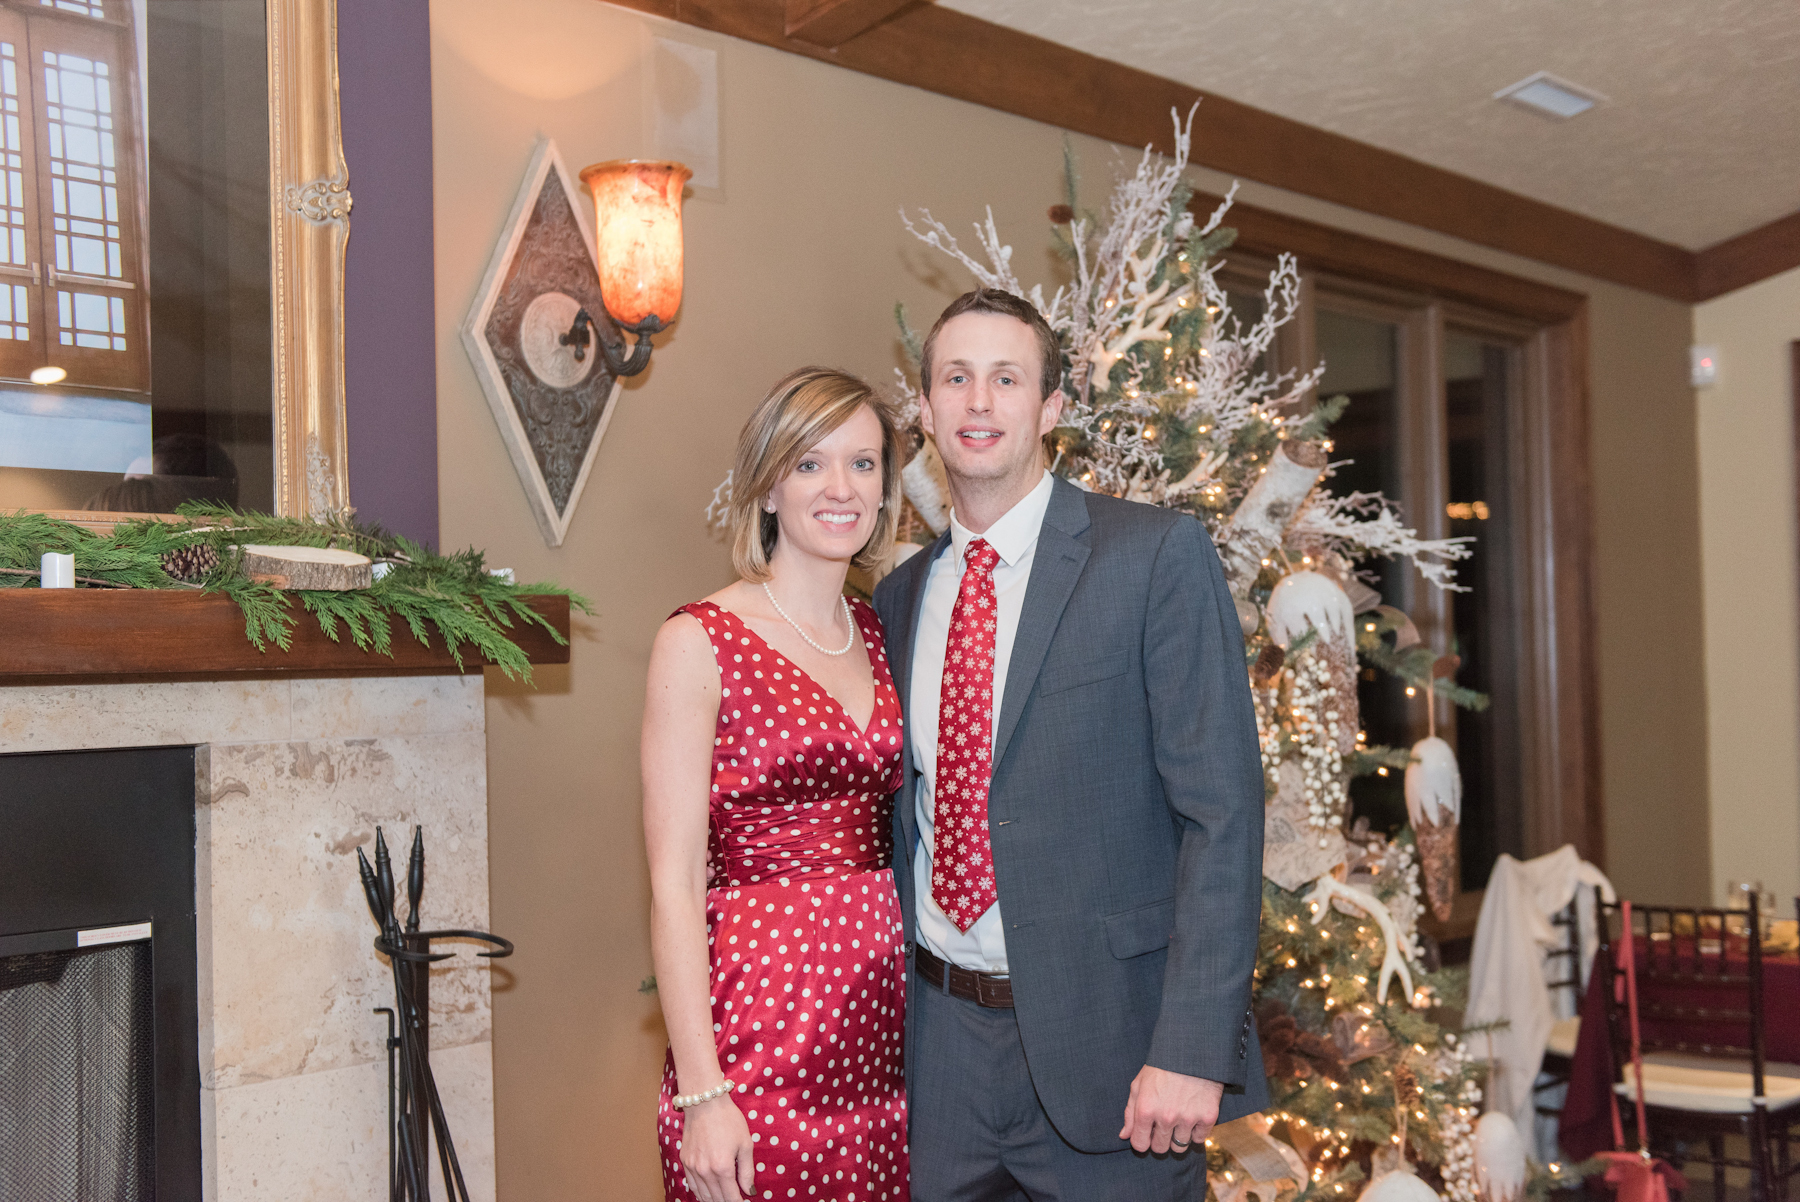 View More: http://christarenephotography.pass.us/tfp-christmas-party